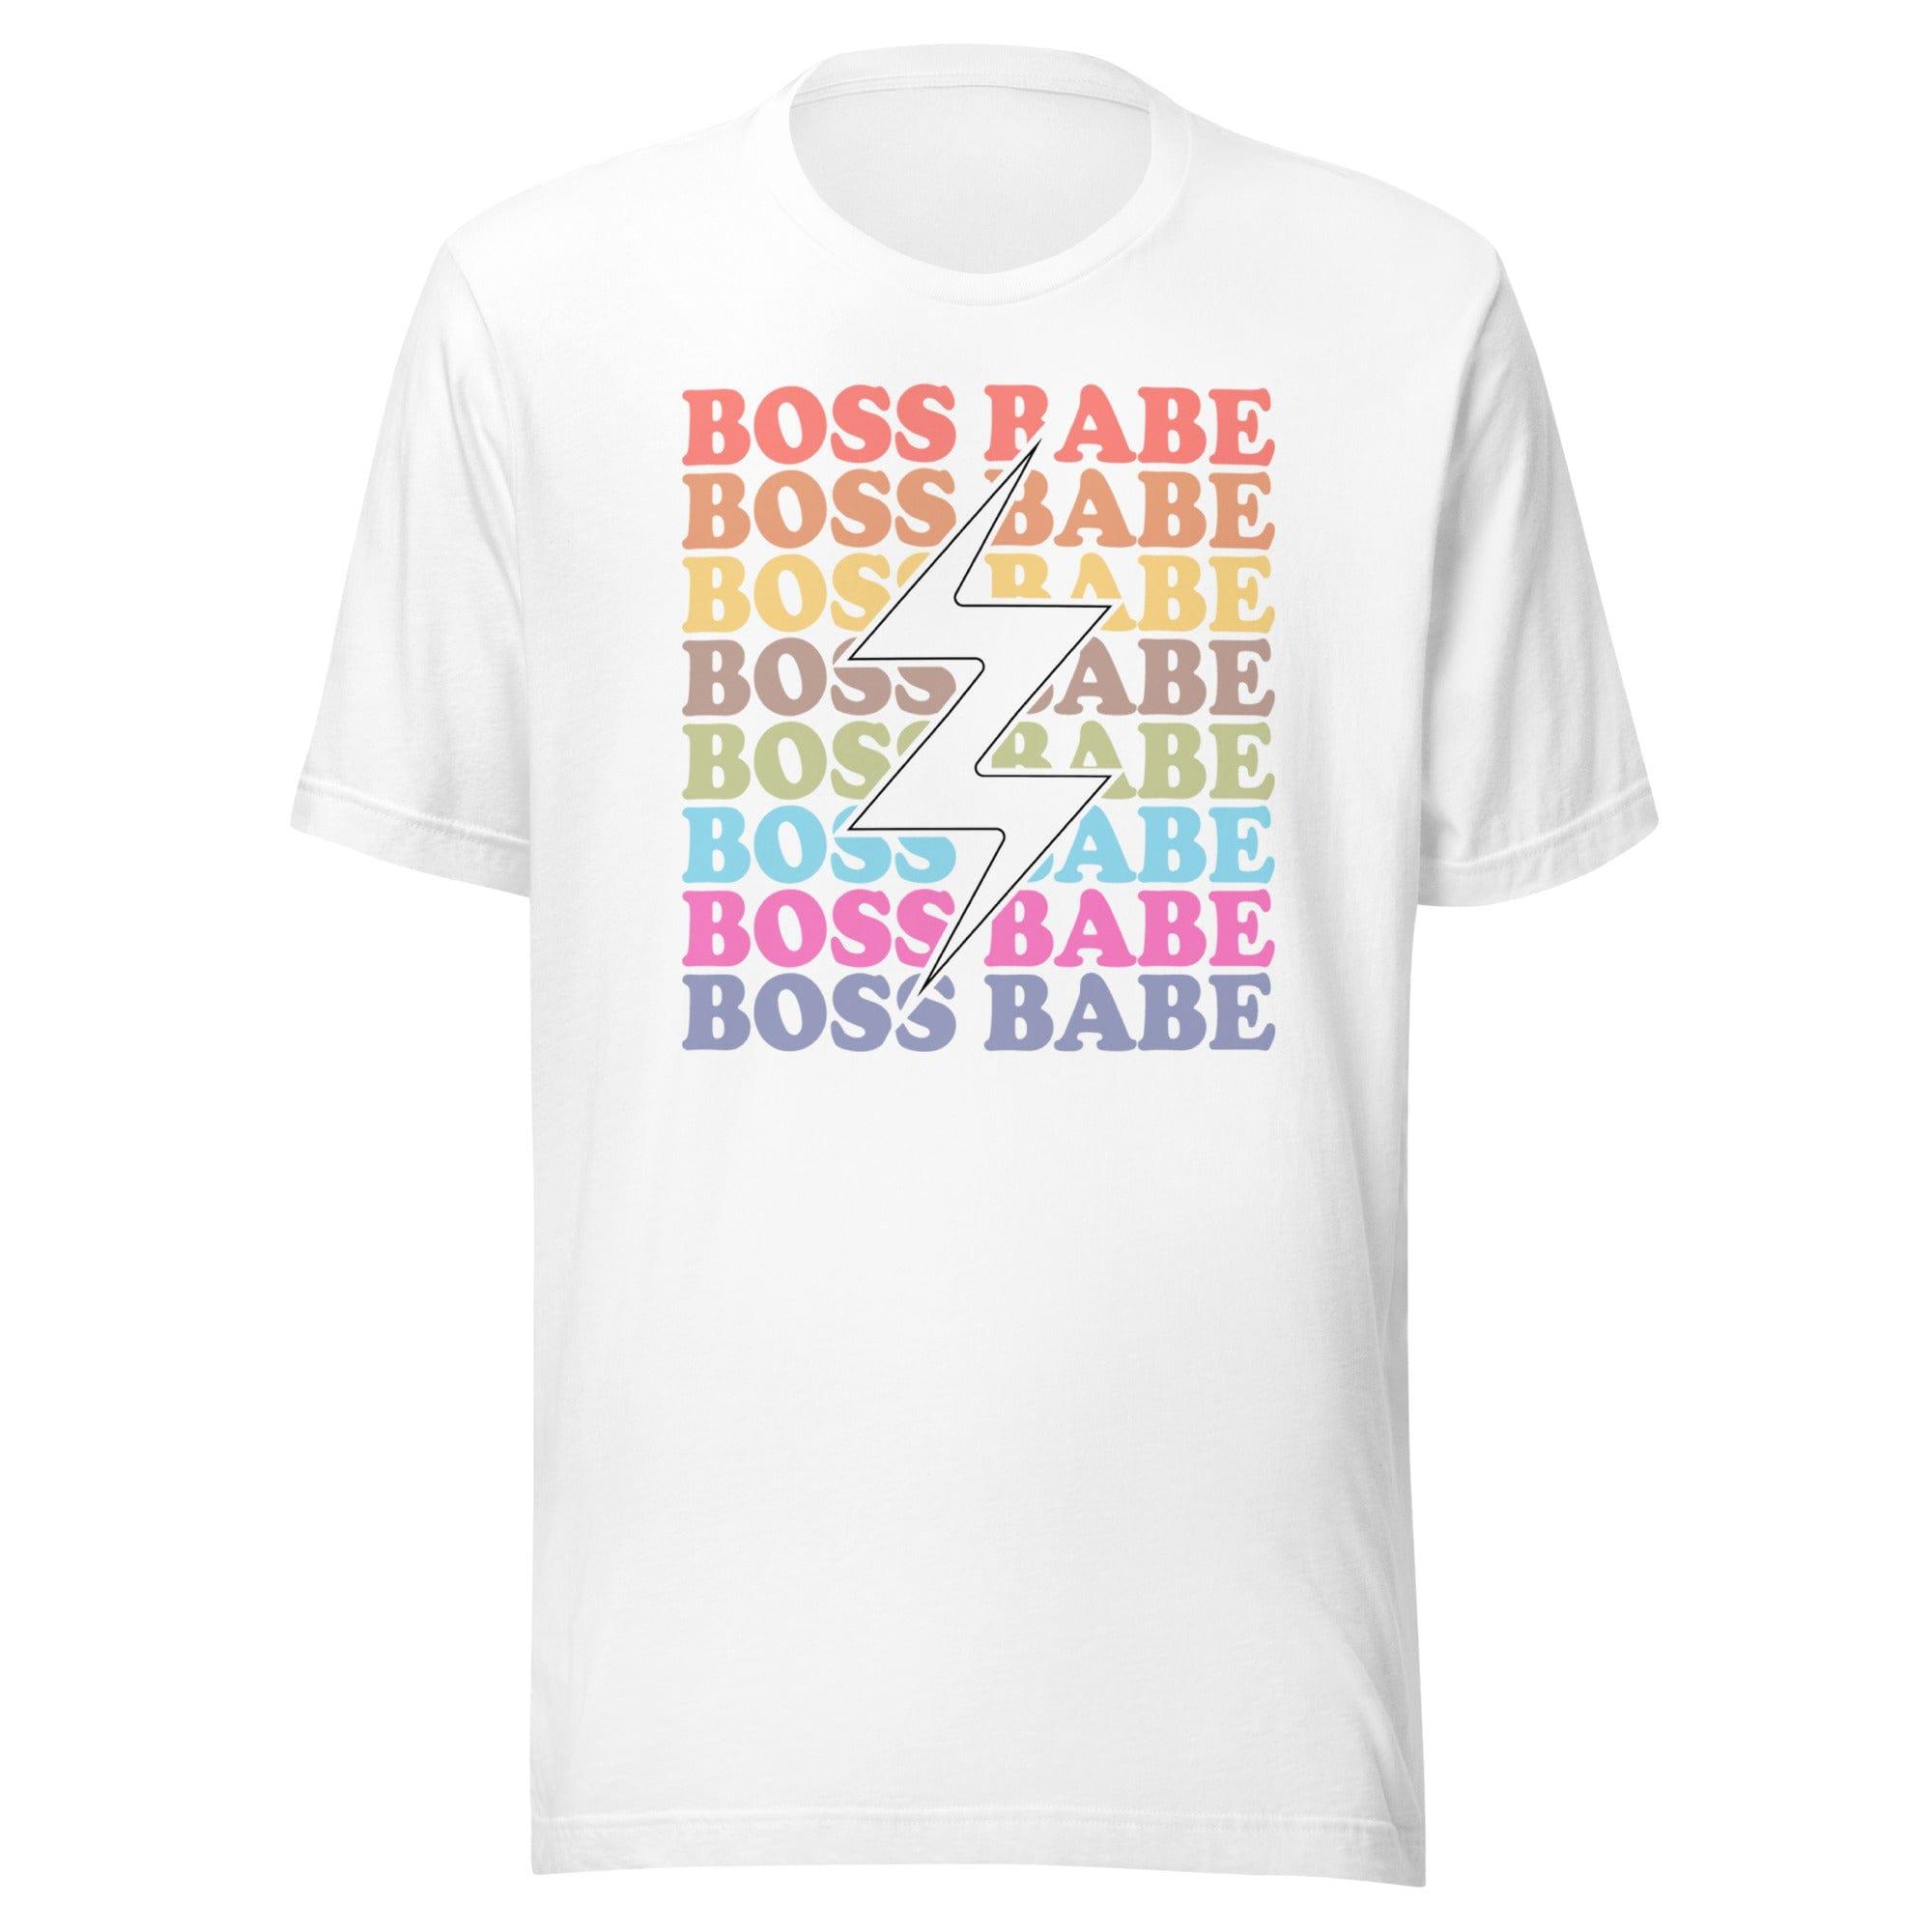 Girl Power T-Shirt Repeated Boss Babe With Lightning Bolt Down The Middle Short Sleeve Unisex Top - TopKoalaTee